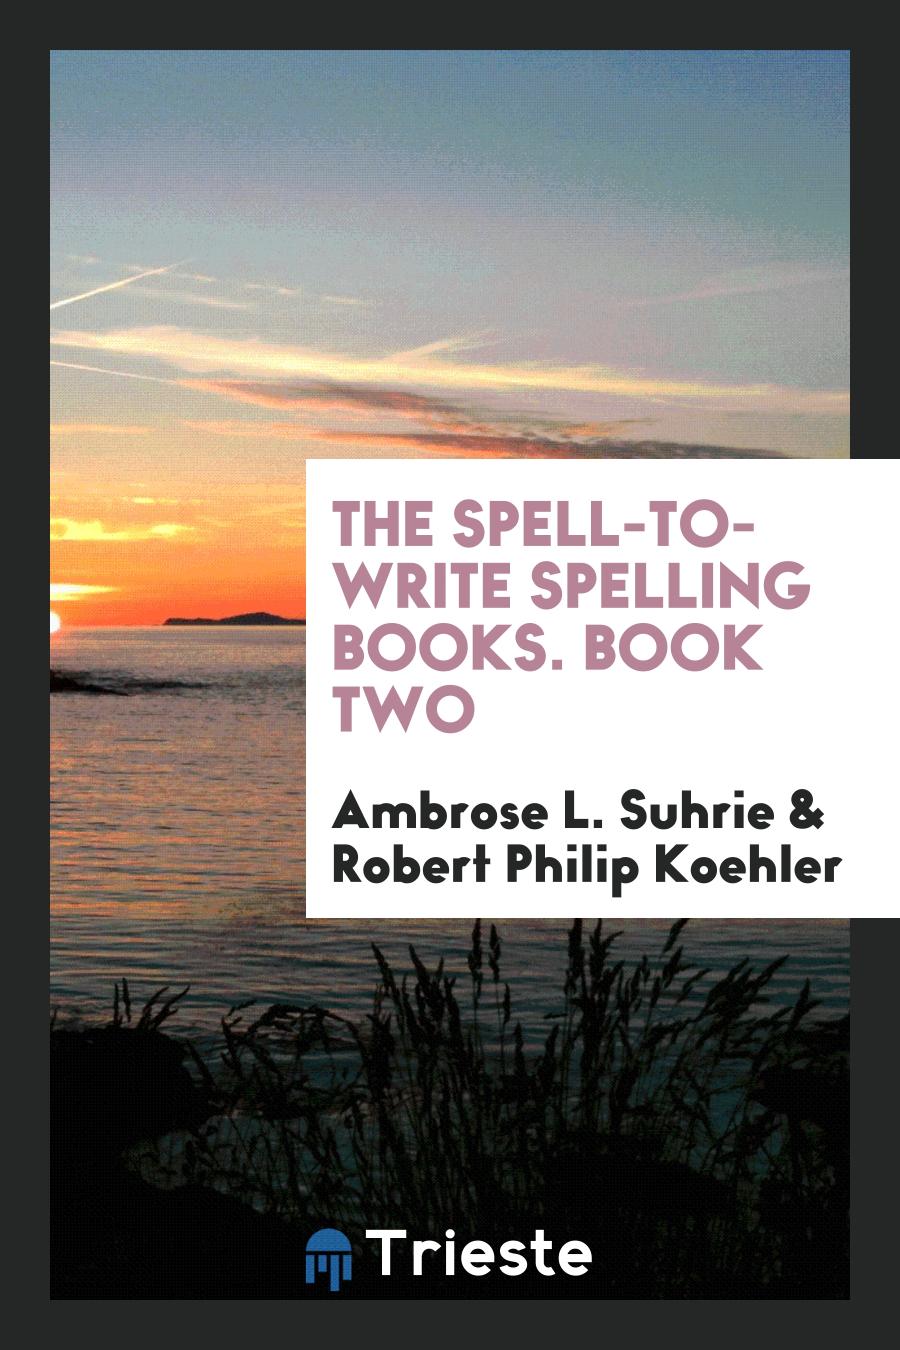 The Spell-to-Write Spelling Books. Book Two